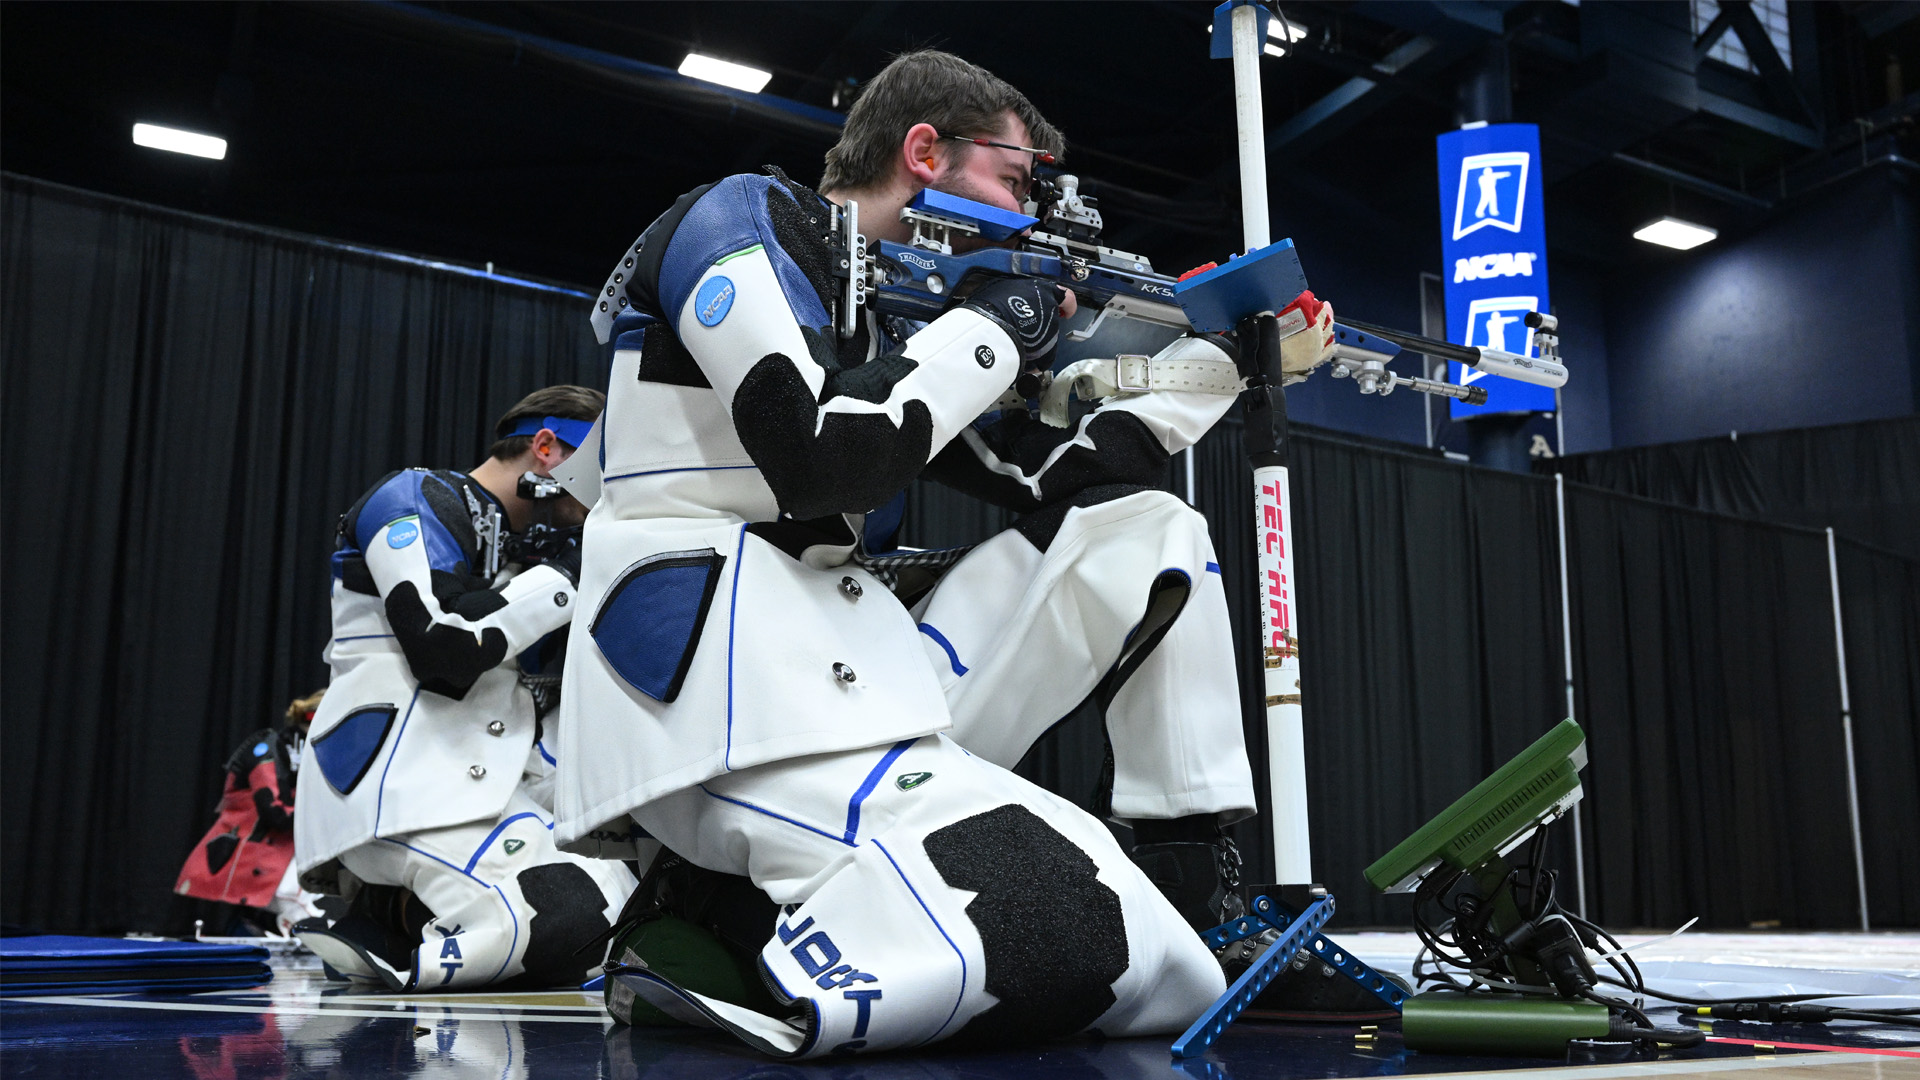 Shaner Wins Silver, Kentucky in T4th Place After Smallbore Friday